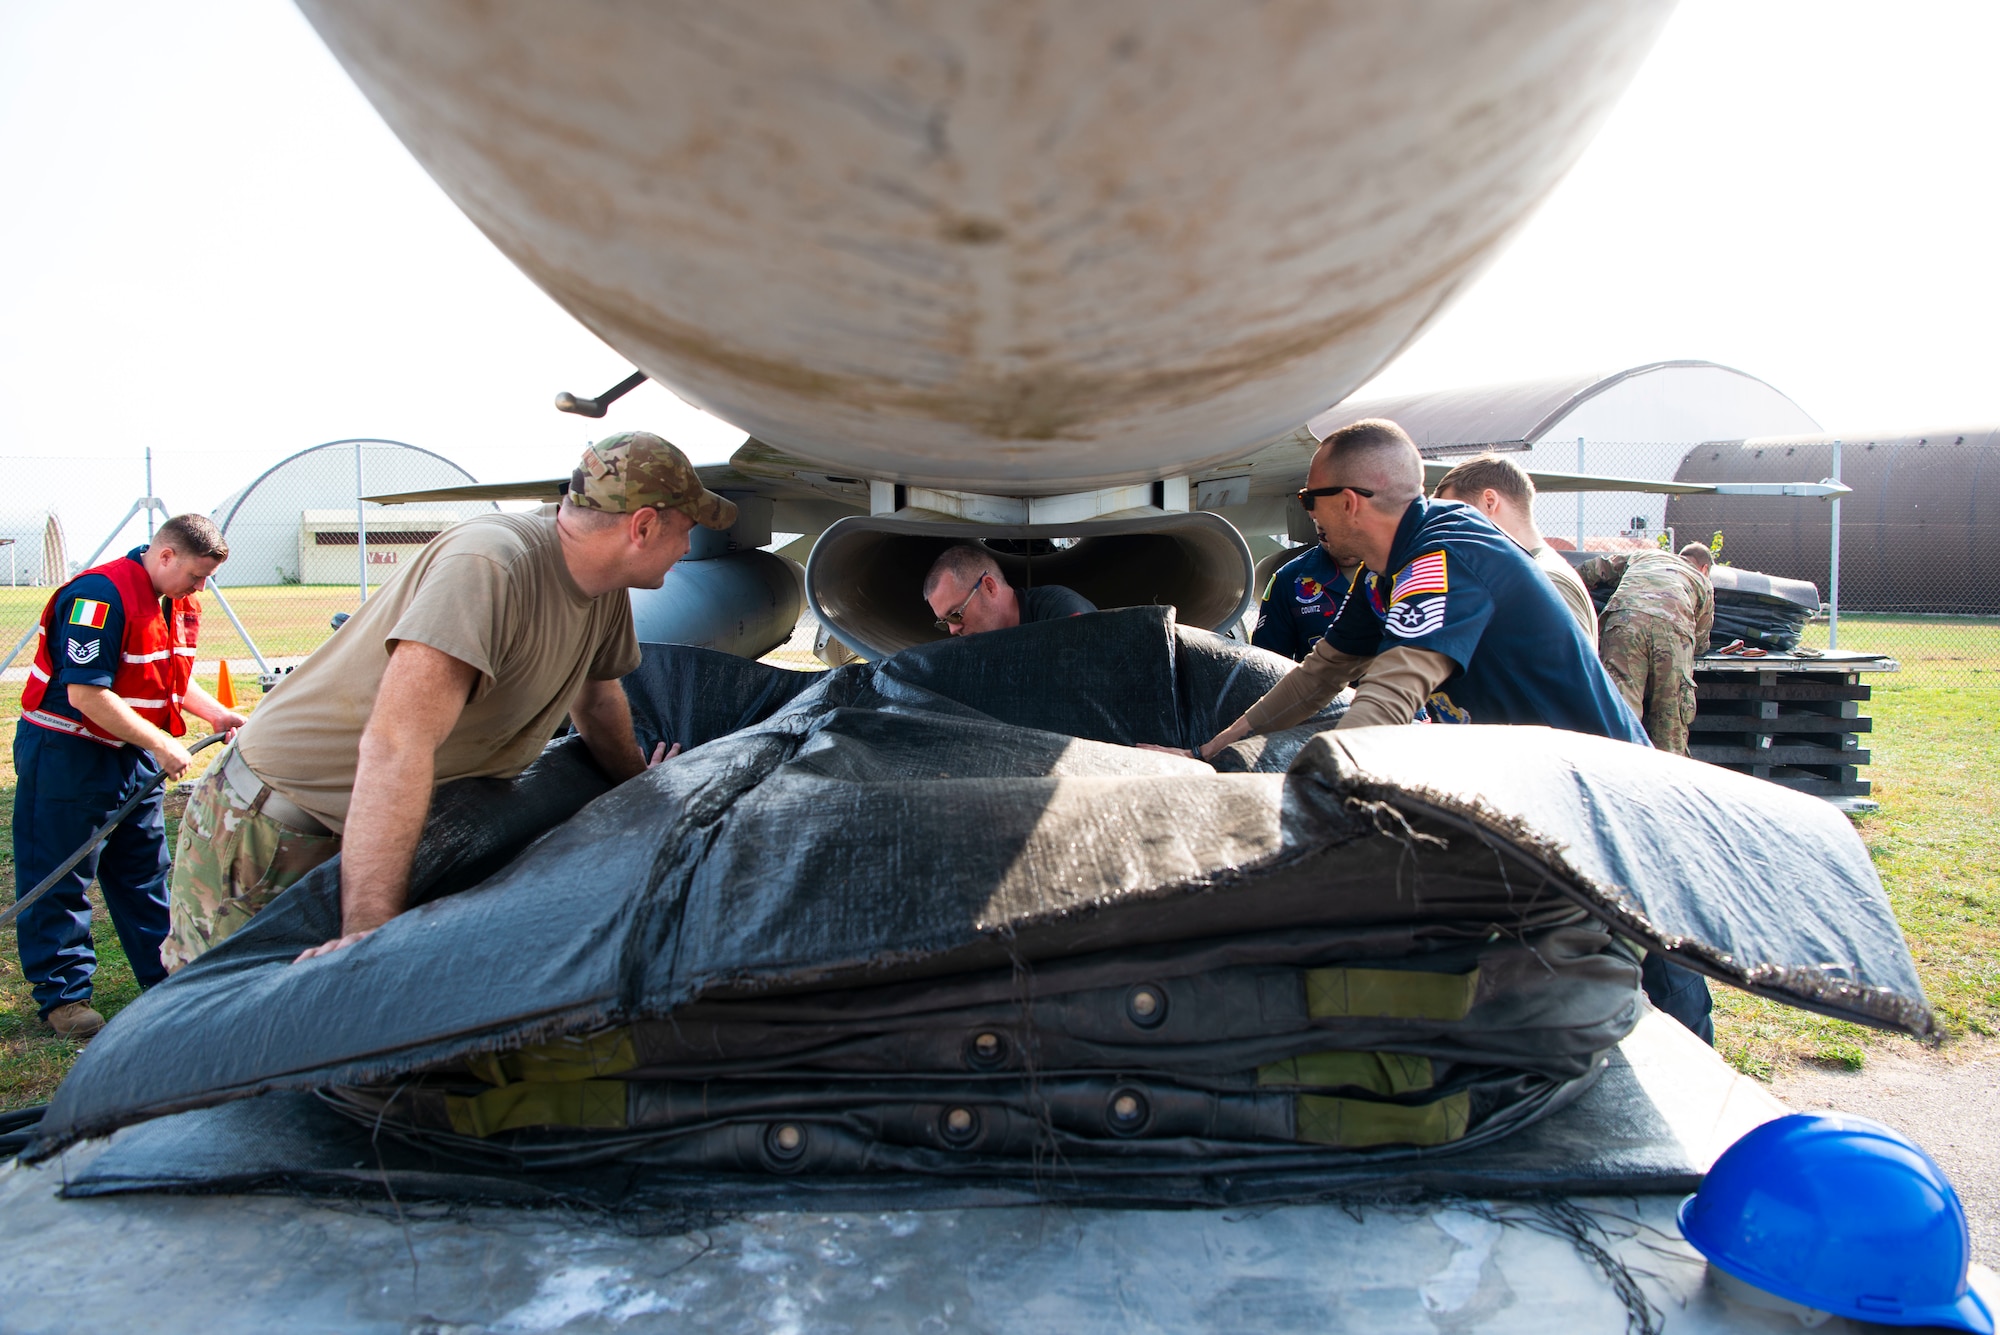 U.S. Airmen pack up a lift bag during a crashed, damaged or disabled aircraft recovery (CDDAR) training at Aviano Air Base, Italy, Oct. 20, 2022. These trainings give Airmen the practice needed to execute real-world recoveries effectively. (U.S. Air Force photo by Airman 1st Class Thomas Calopedis)